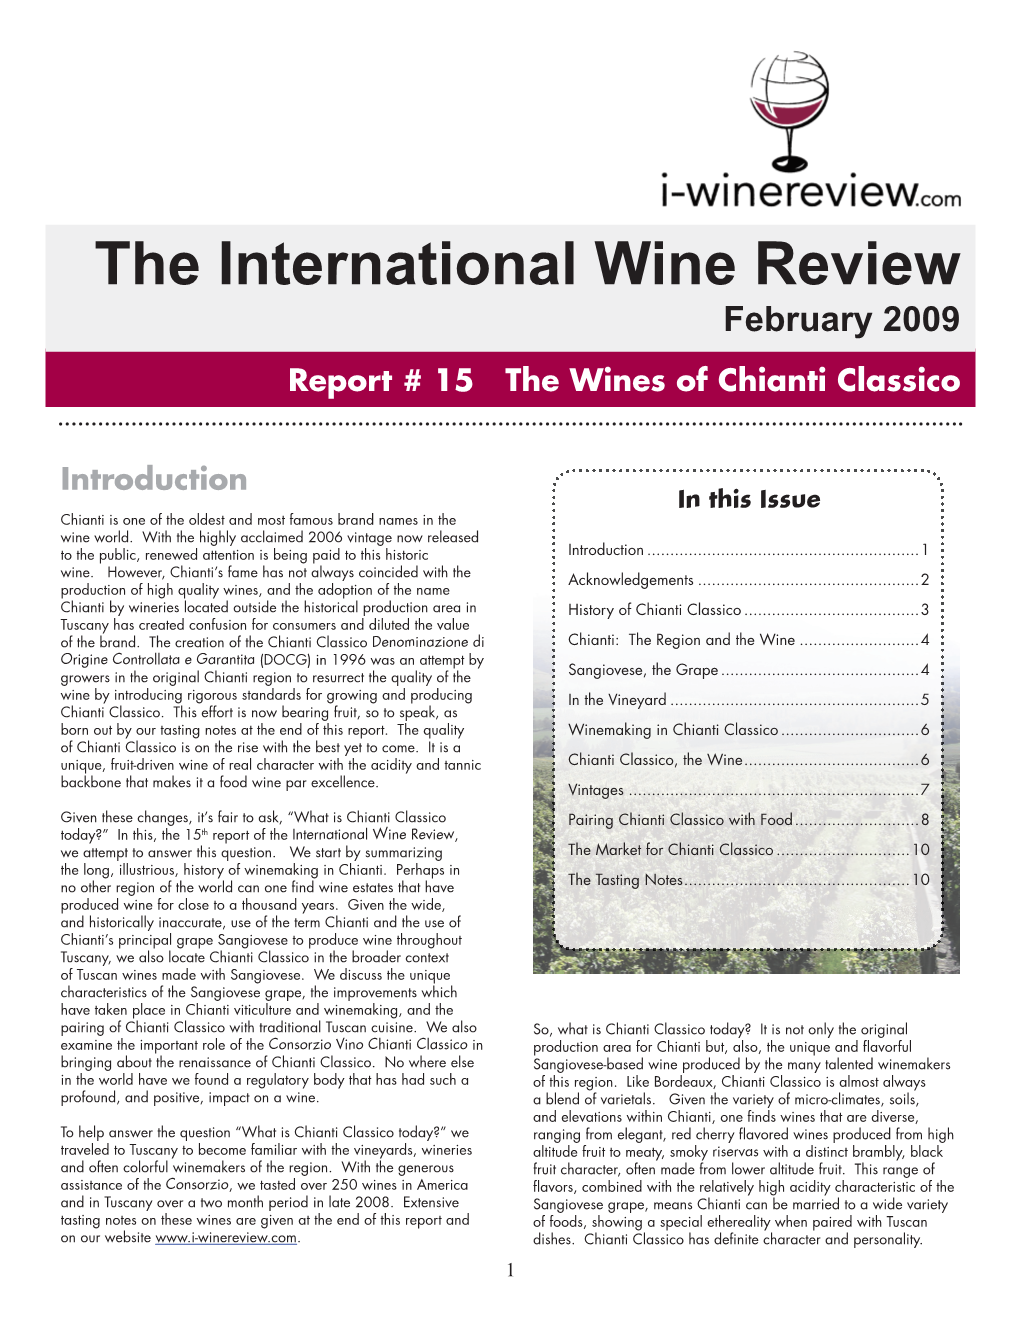 I-Wine Review